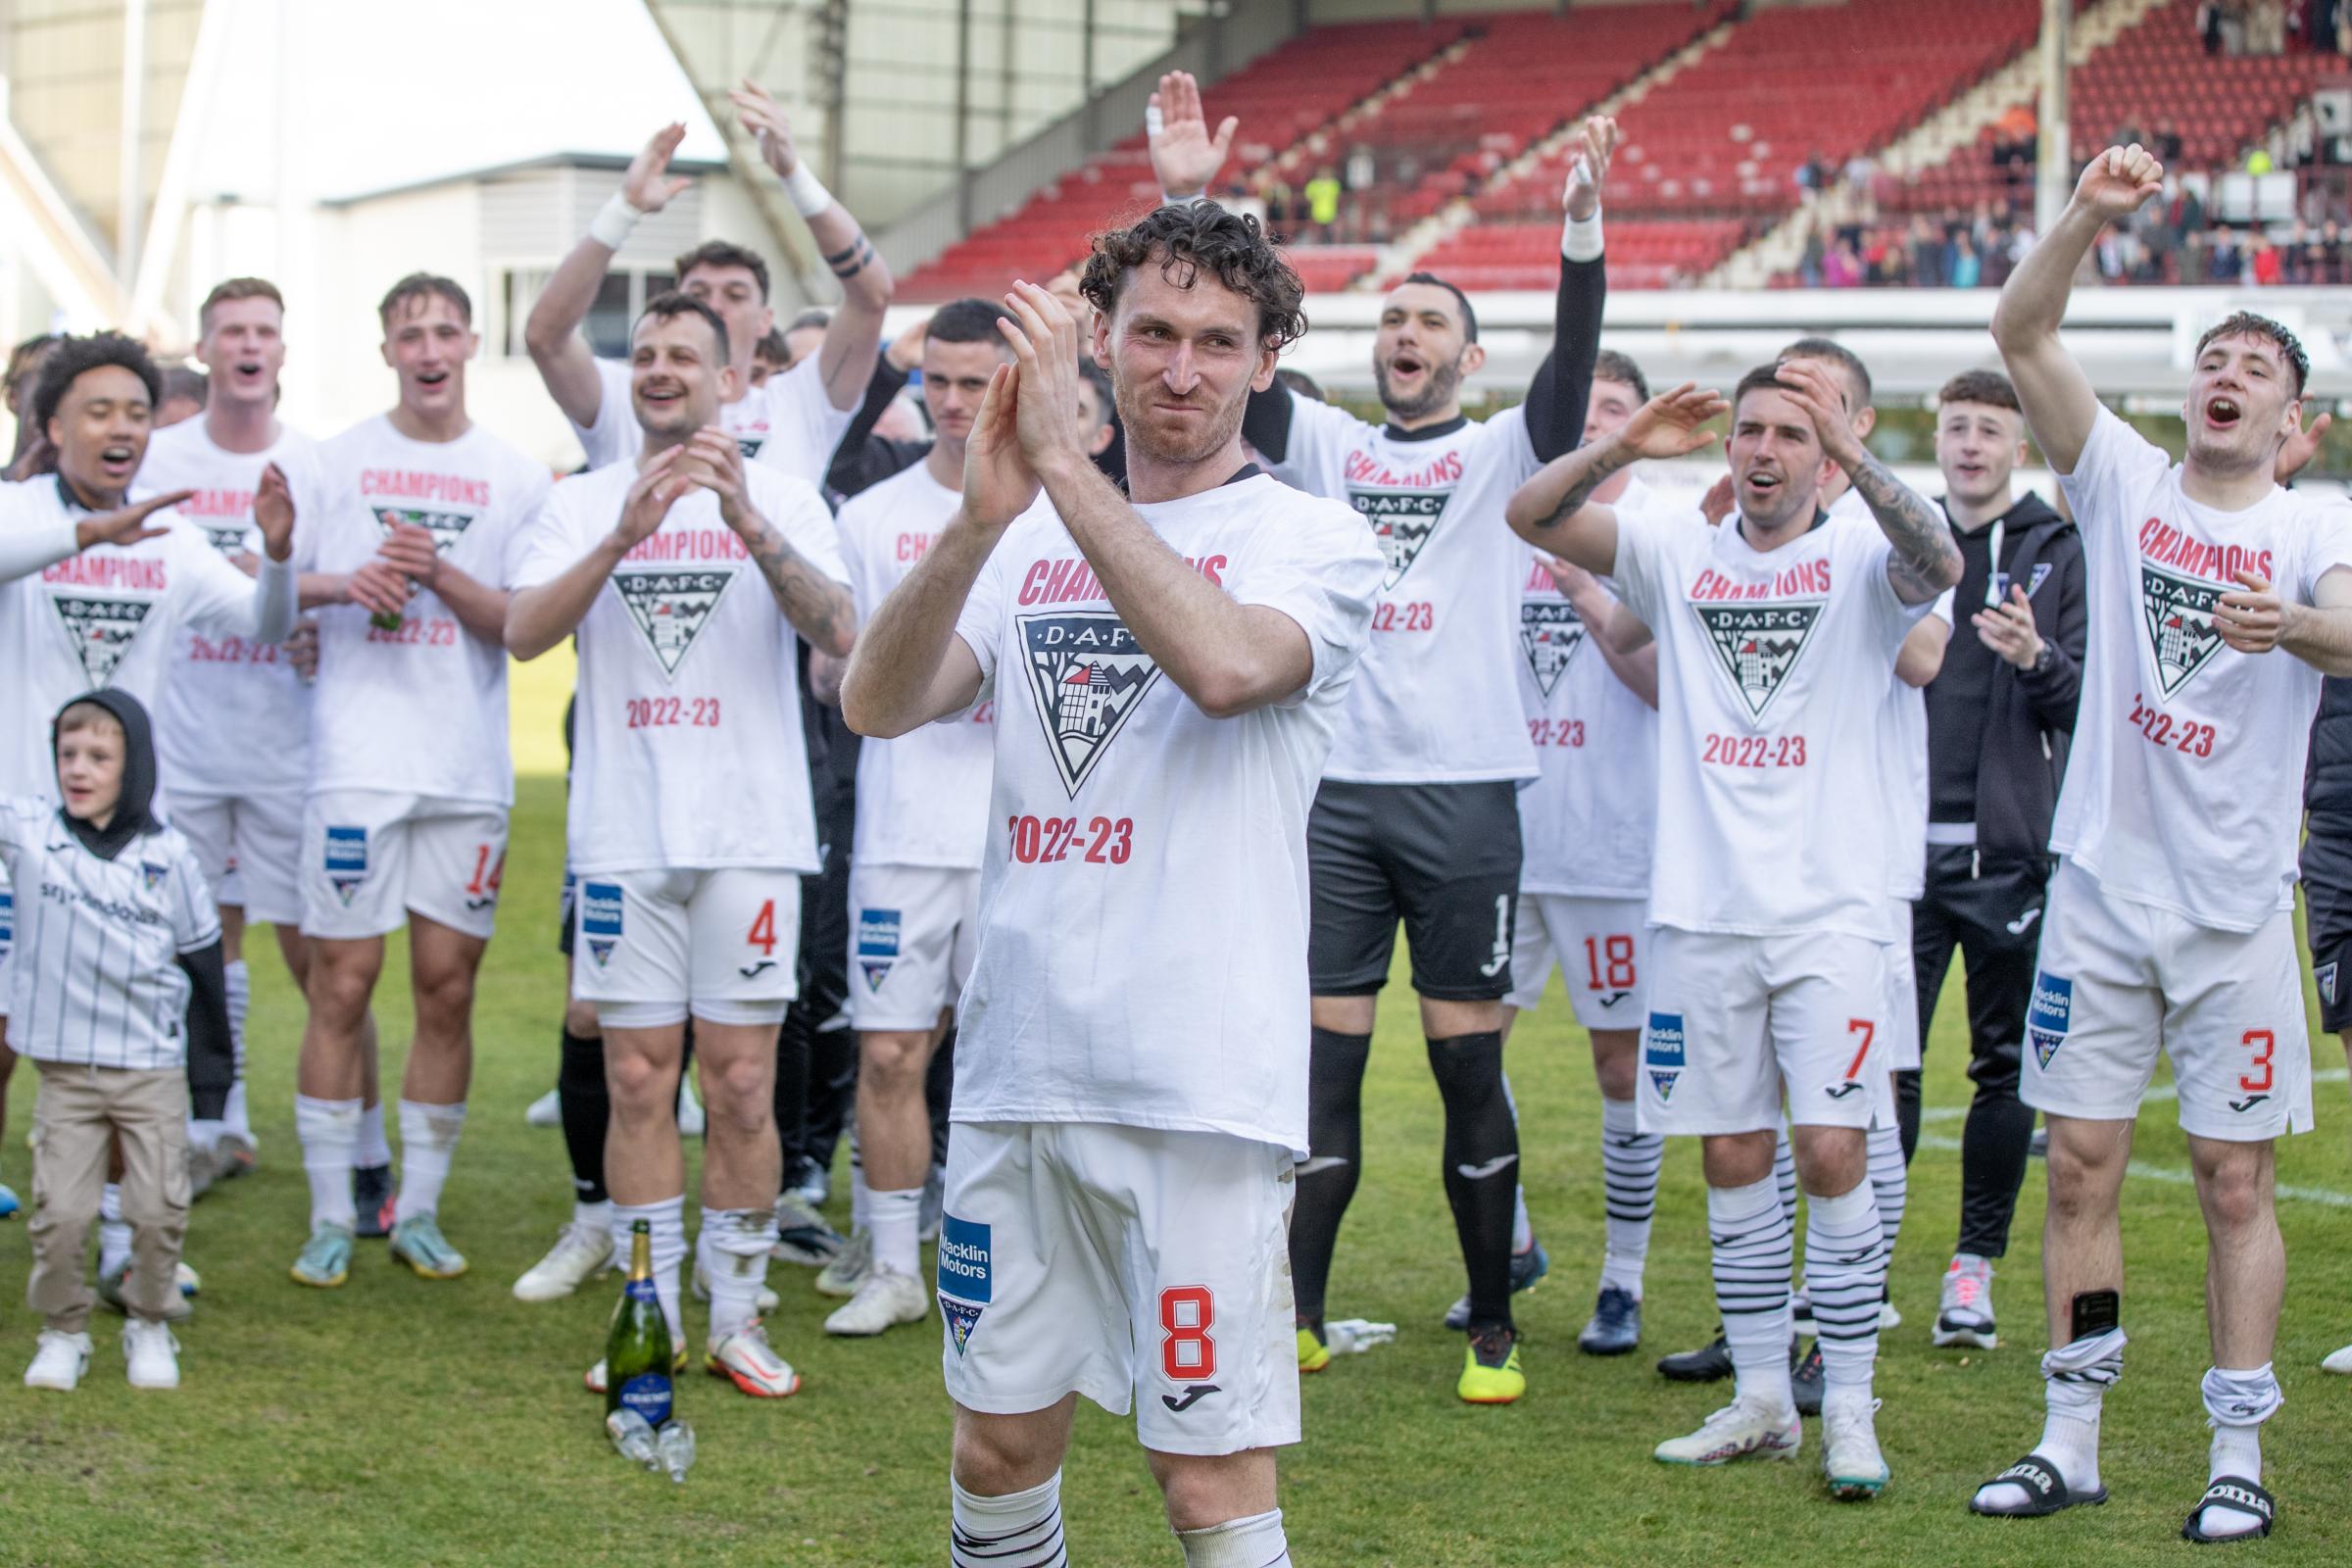 Dunfermline: Joe Chalmers on League One season and family support